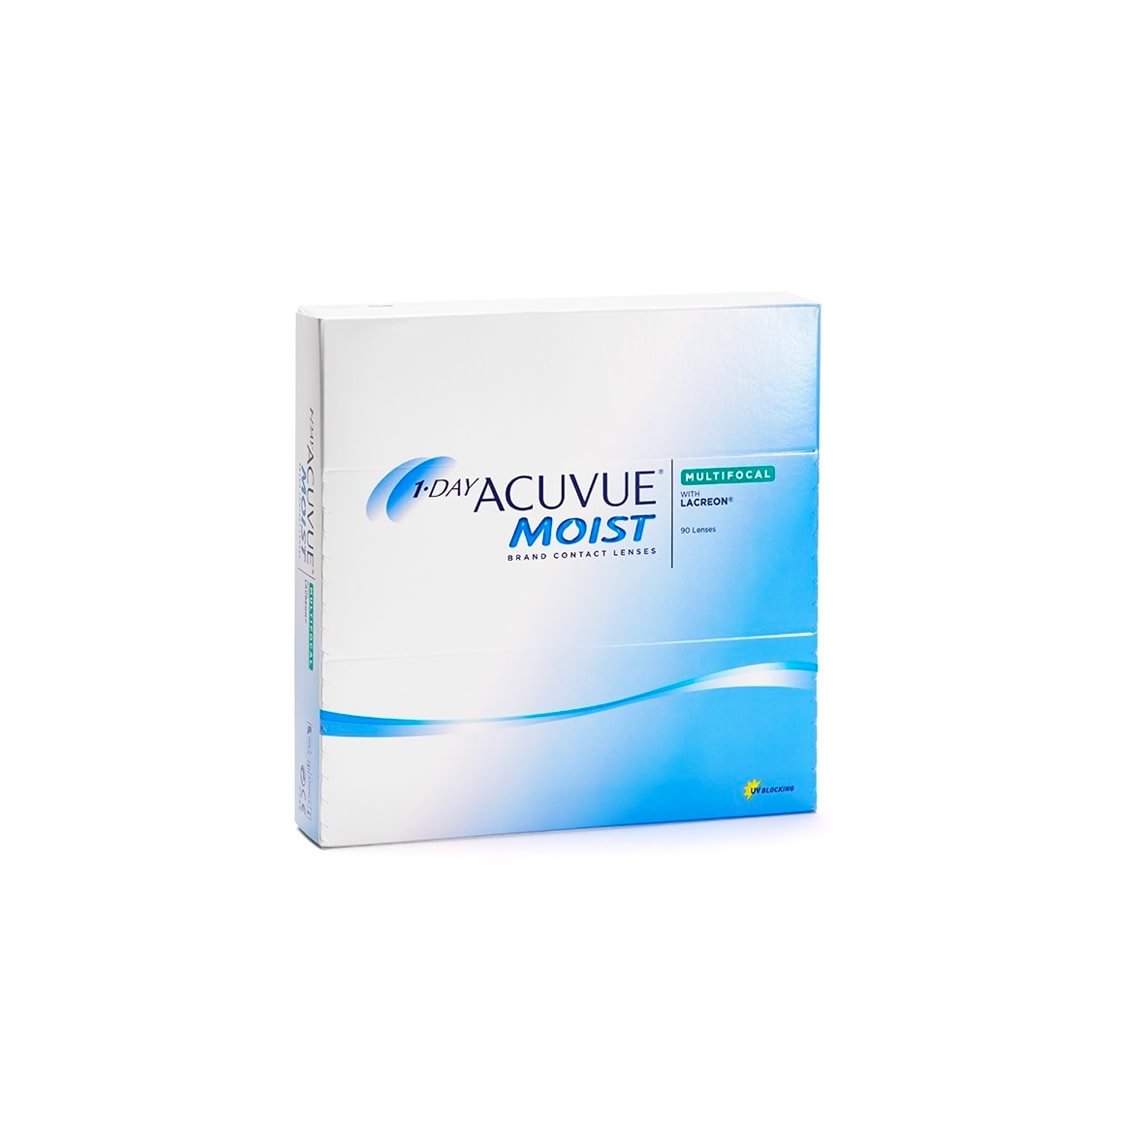 1-Day Acuvue Moist Multifocal 90 st/box